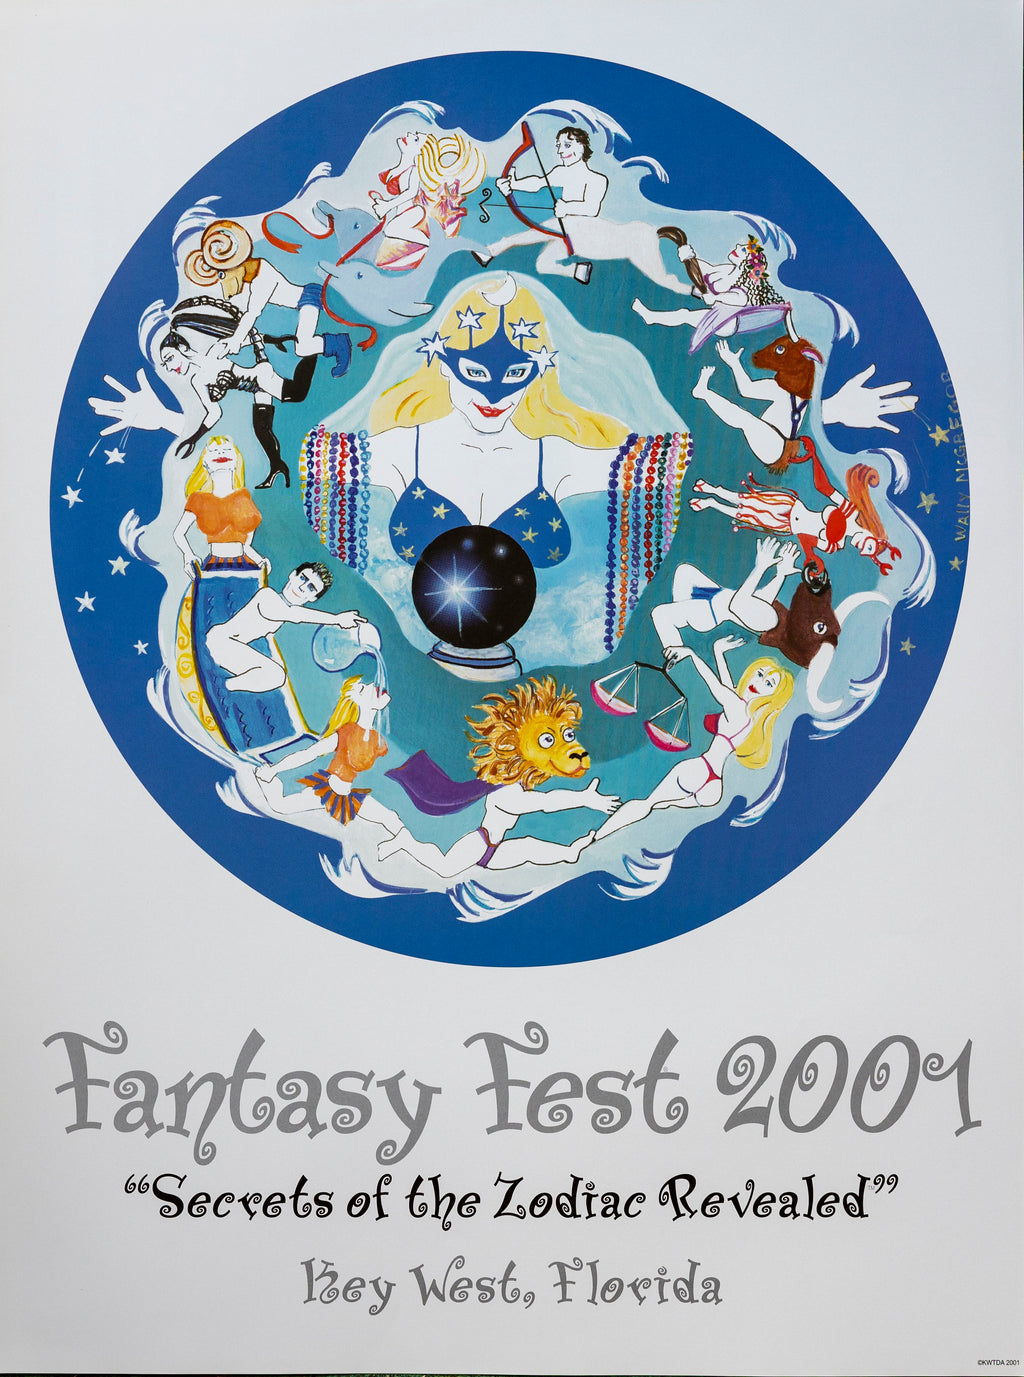 Official 2001 Fantasy Fest Poster Secrets of the Zodiac Revealed by Wally McGregor